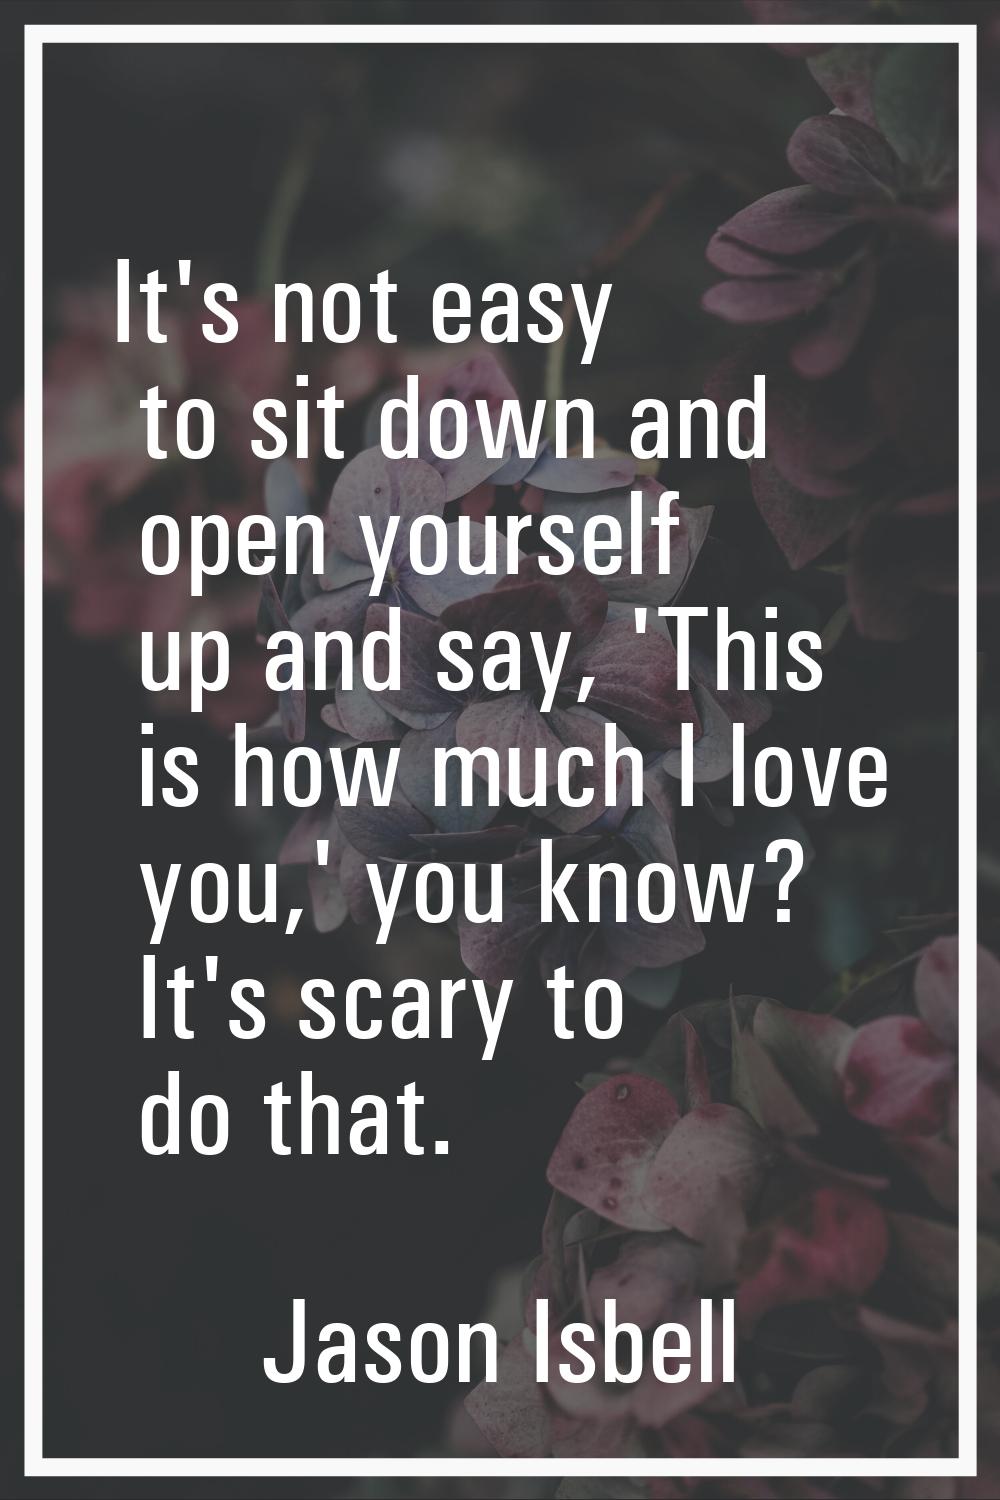 It's not easy to sit down and open yourself up and say, 'This is how much I love you,' you know? It